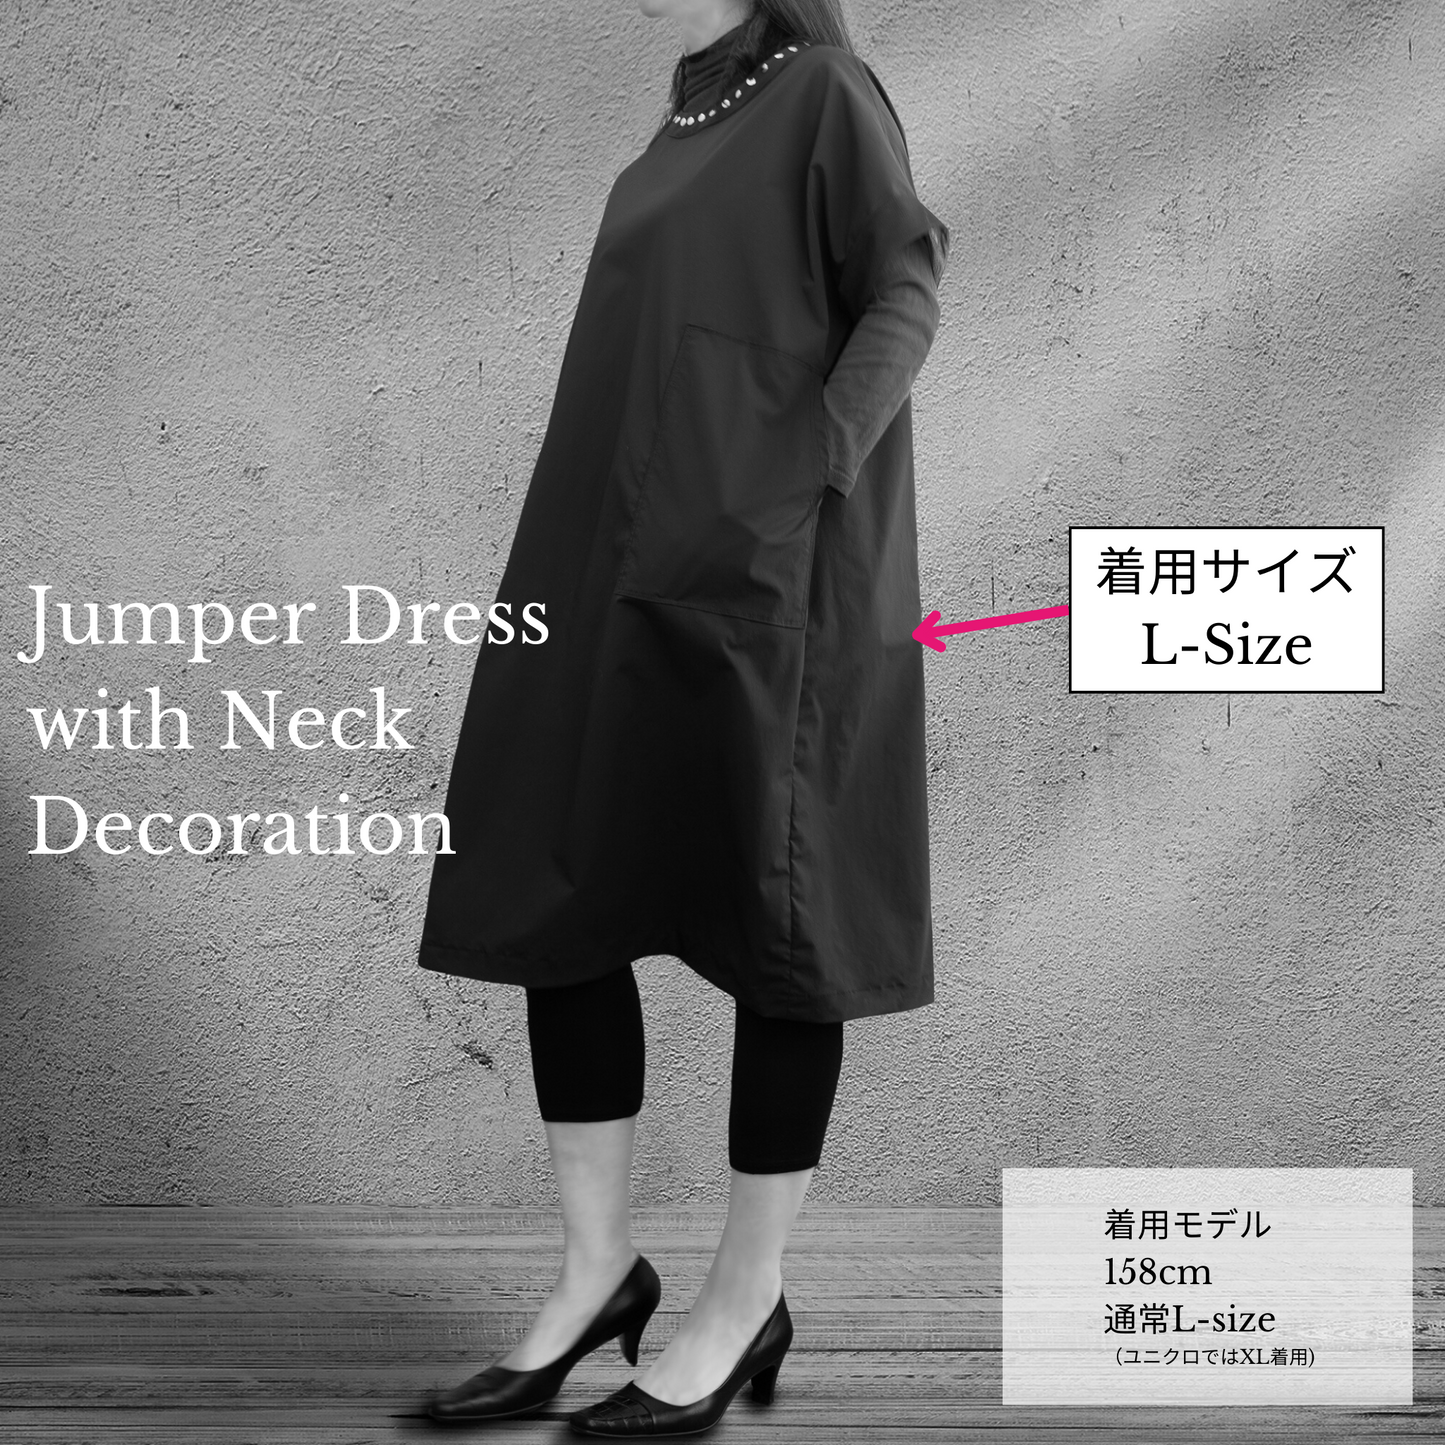 Jumper skirt &amp; dress Clothes determined by one piece AP23 determined by just wearing 